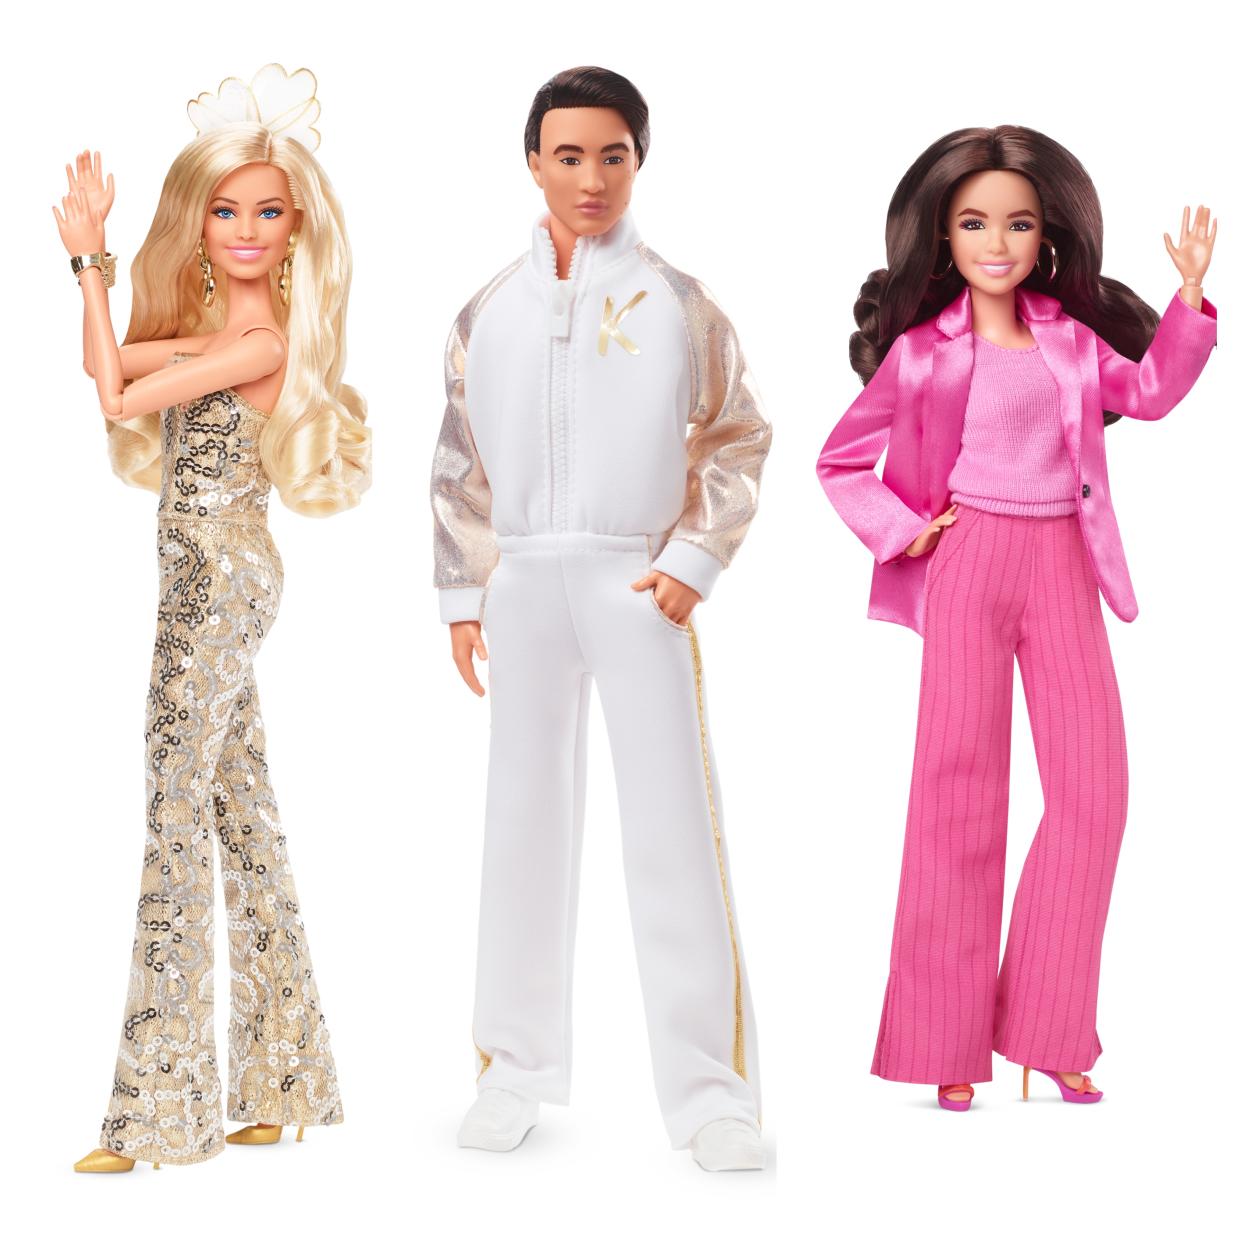 Other looks from the film that received a doll incarnation are Barbie in a gold jumpsuit, Ken in a gold and white ensemble and the character Gloria Vaughn, wearing an all-pink outfit. (Credit: Mattel, inc.) 